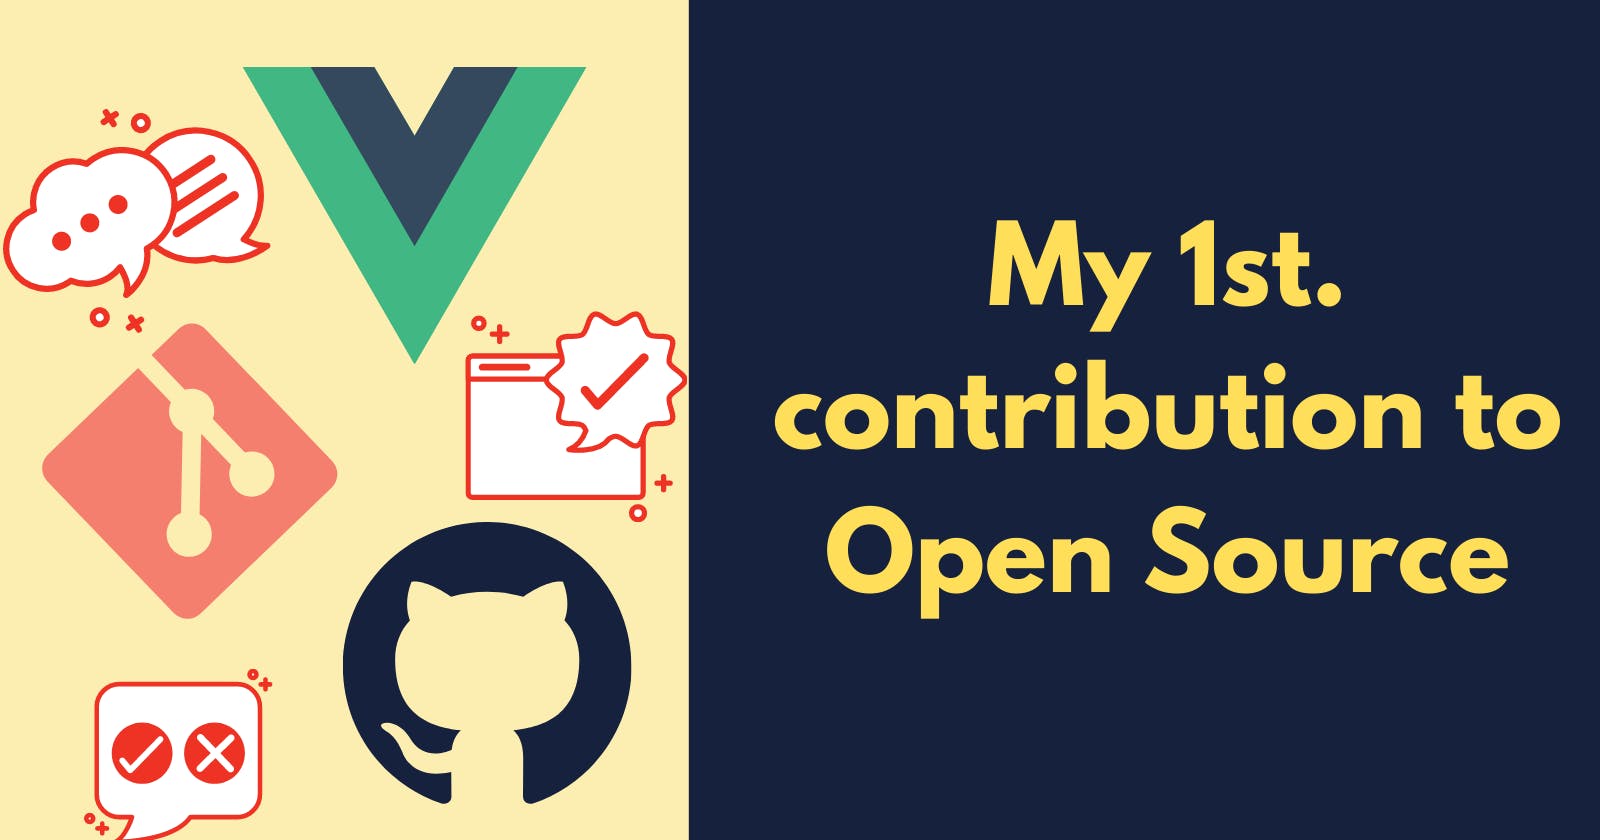 My 1st. contribution to Open Source